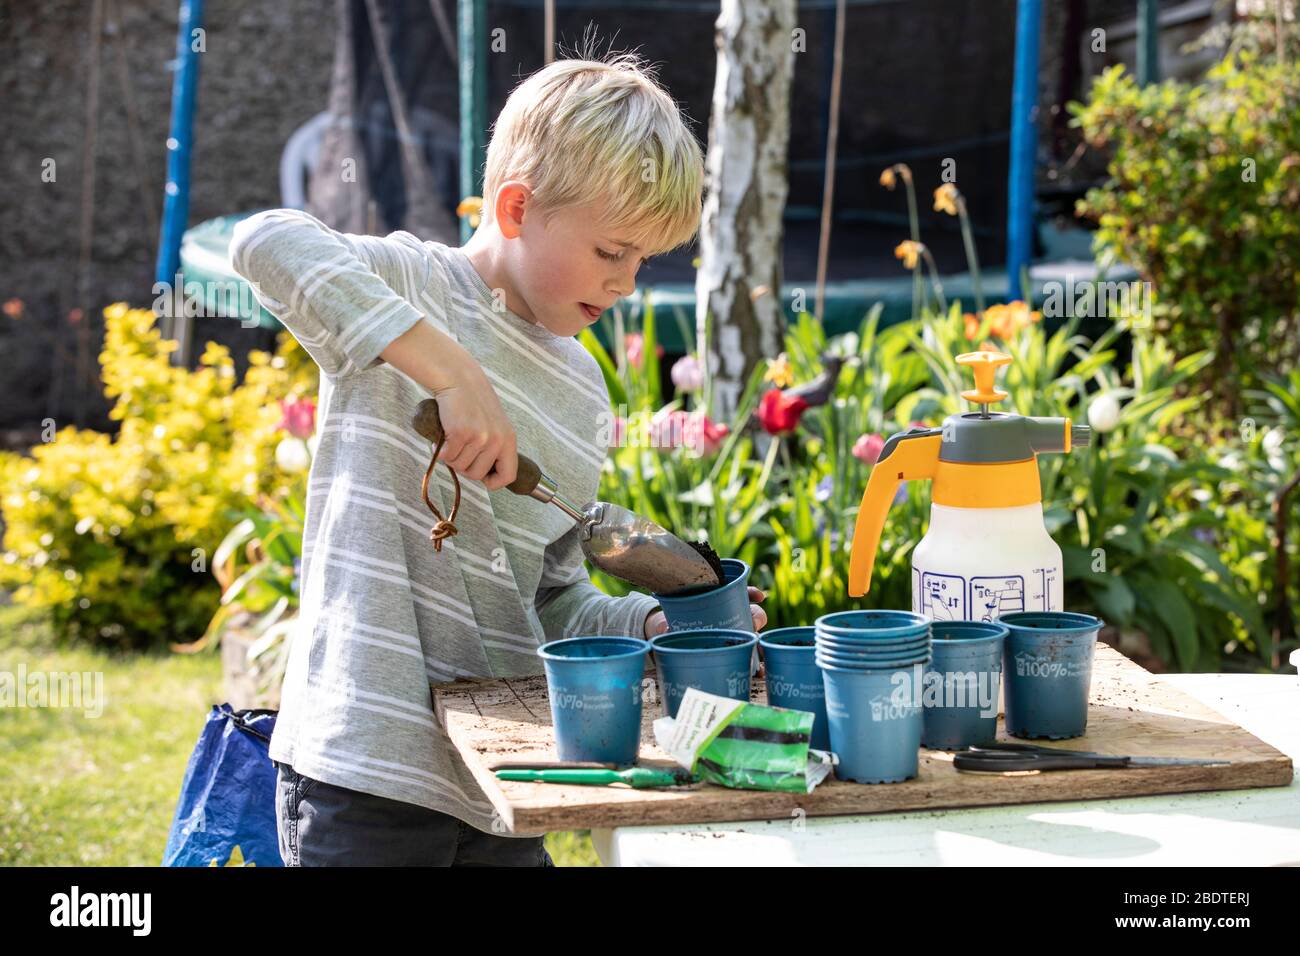 9 year old boy potting up vegetable plants in his back garden on a spring day, England, United Kingdom Stock Photo